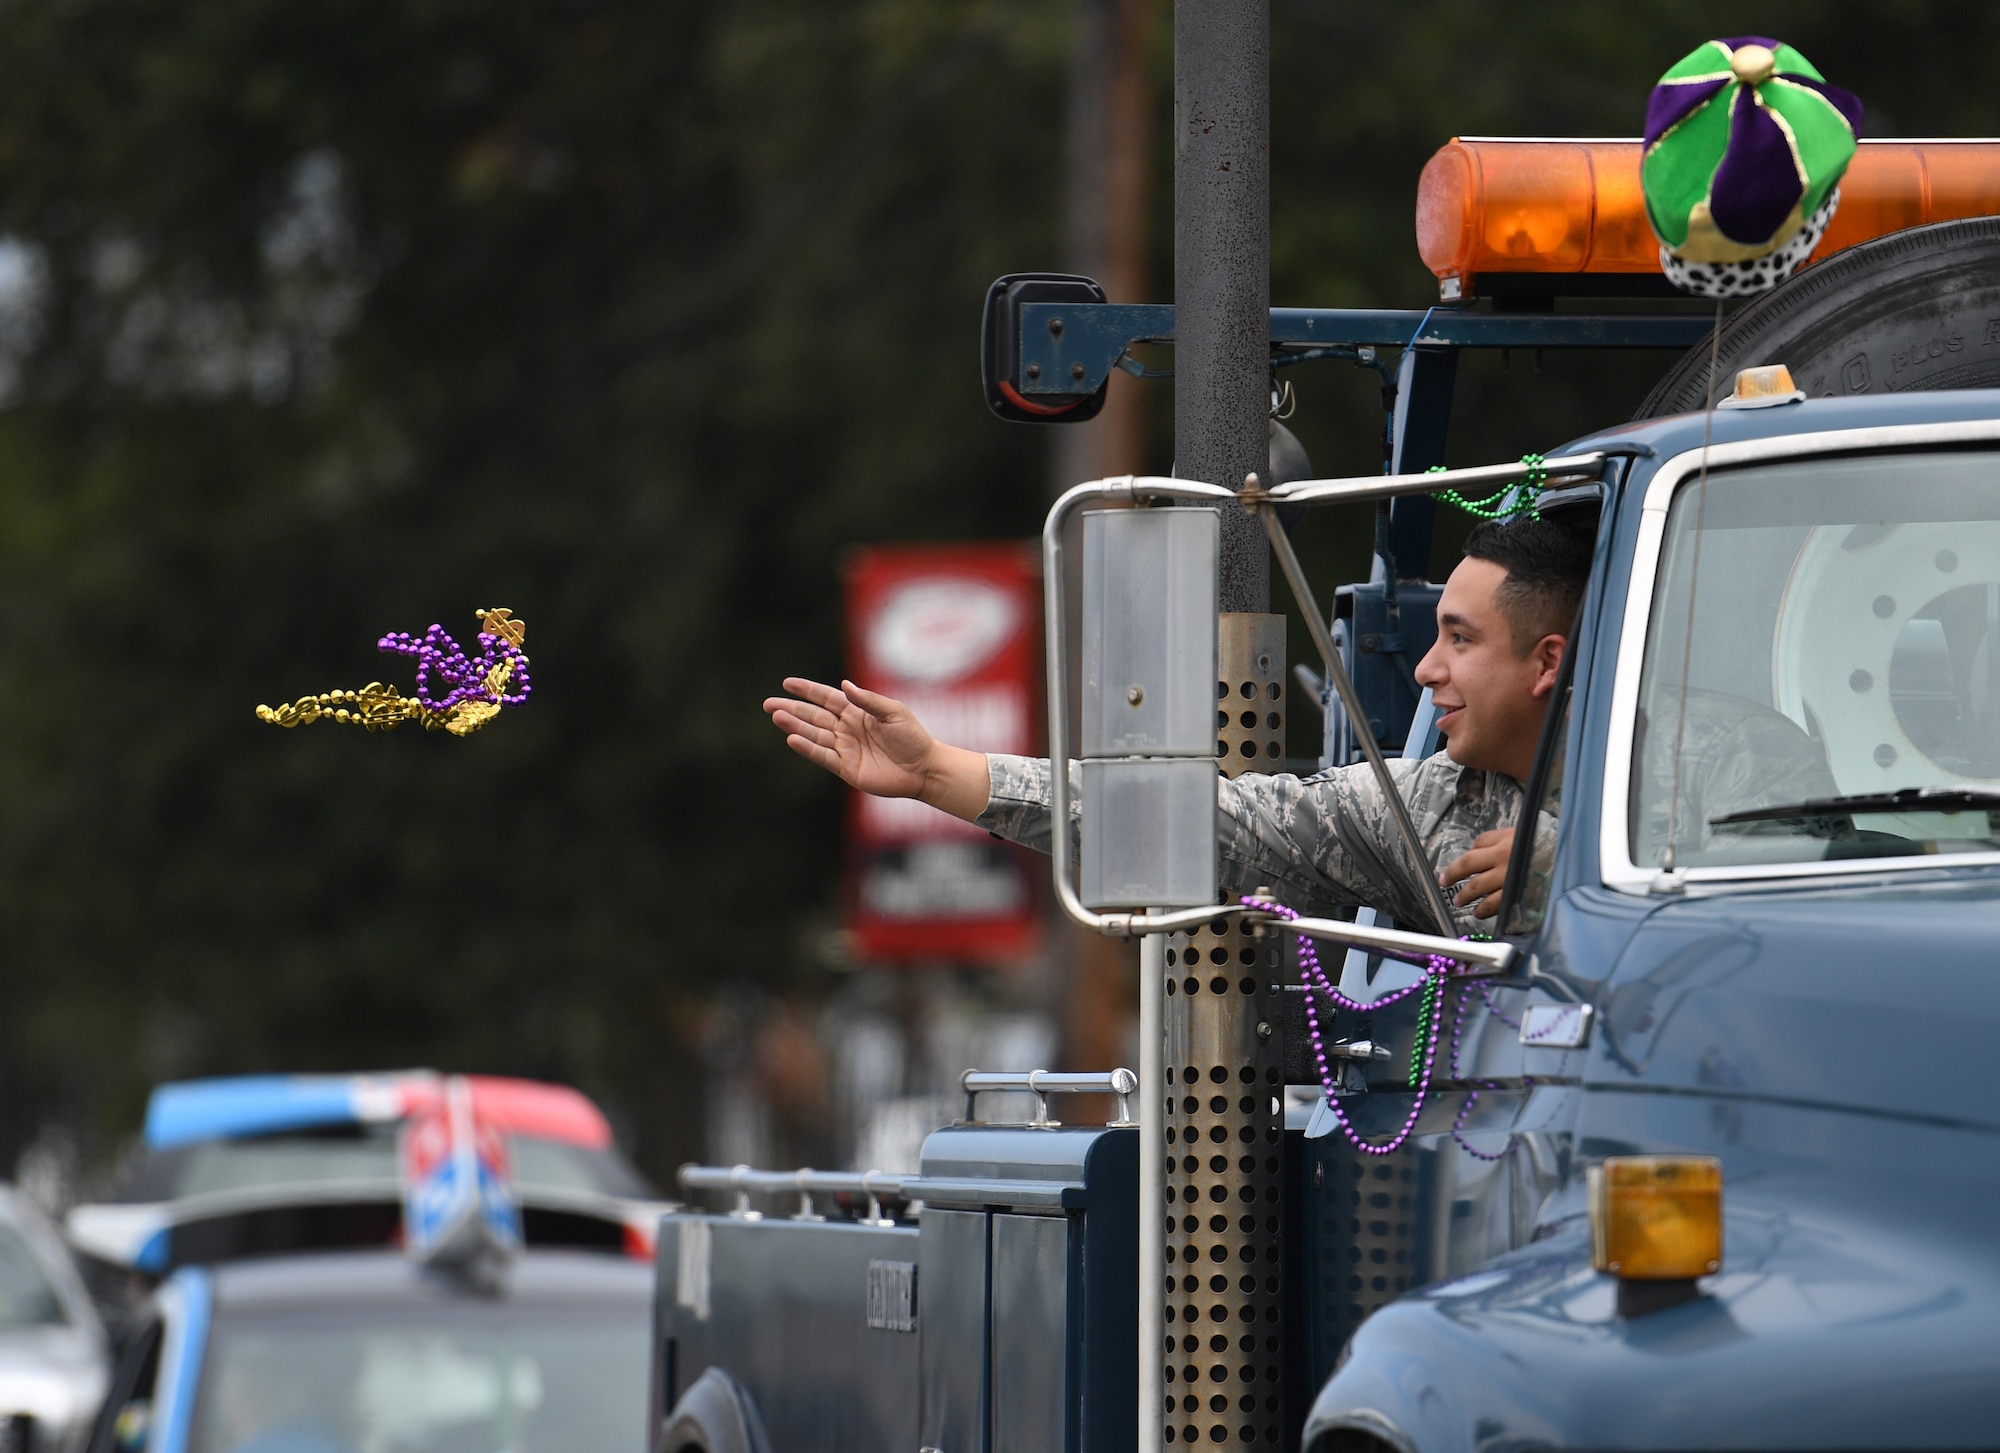 U.S. Air Force Senior Airman Andrew Hernandez, 81st Logistics Readiness Squadron training and validation, tosses beads to children during the Jeff Davis Elementary School Mardi Gras parade in Biloxi, Mississippi, March 1, 2019. Keesler leadership, Honor Guard and Airmen participated in various festivities throughout the Mardi Gras season, which is celebrated by the local communities. (U.S. Air Force photo by Kemberly Groue)